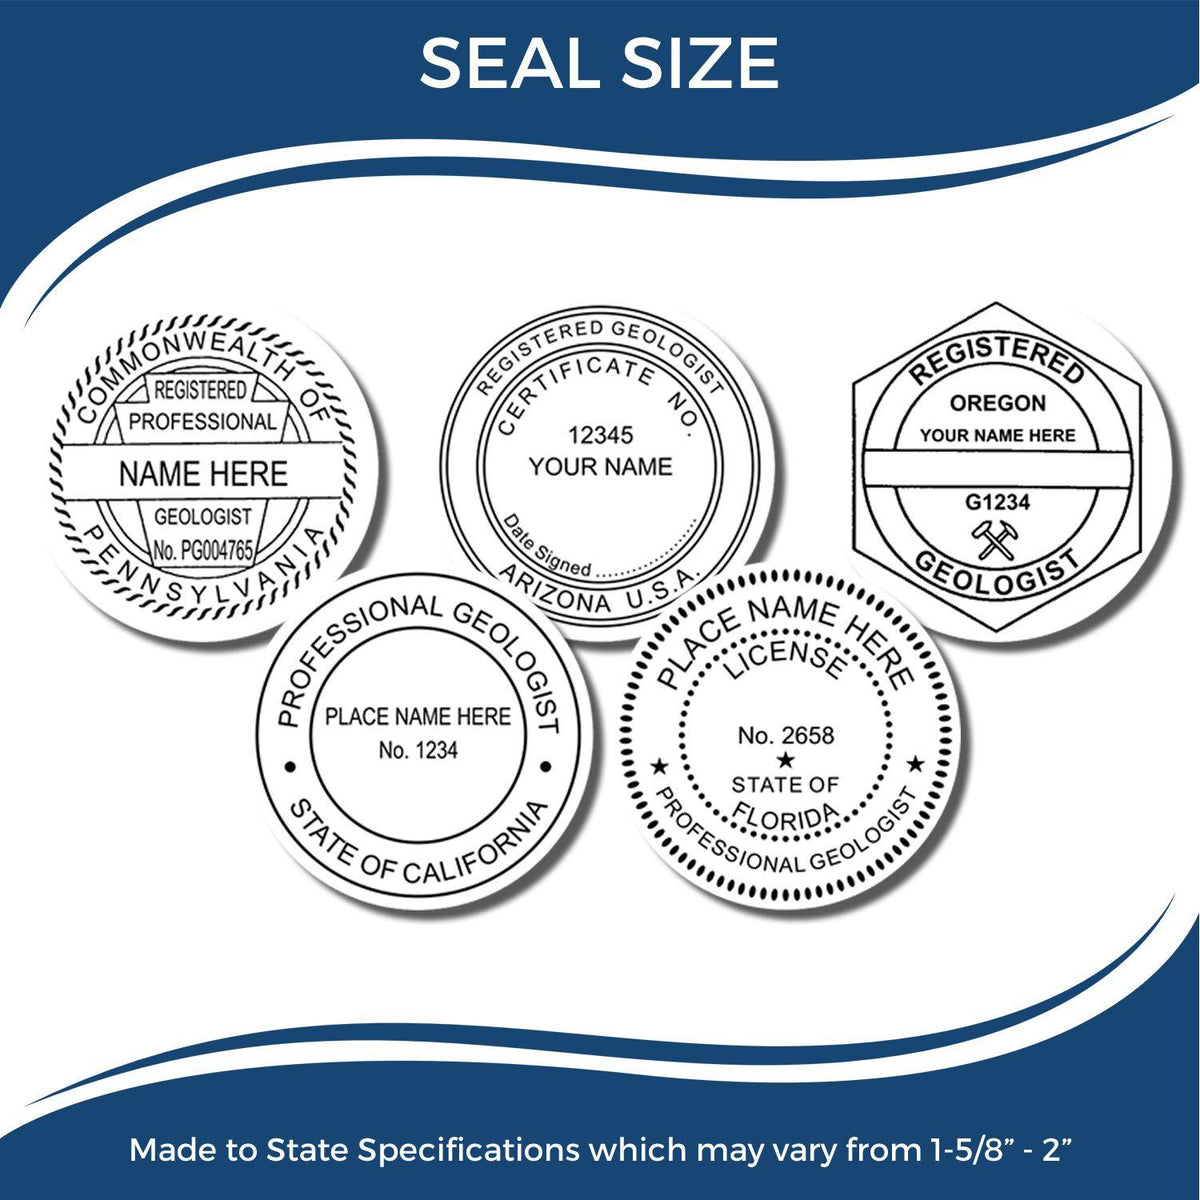 Geologist eSeal Electronic Image Stamp of Seal - Engineer Seal Stamps - Stamp Type_Electronic, Type of Use_Professional